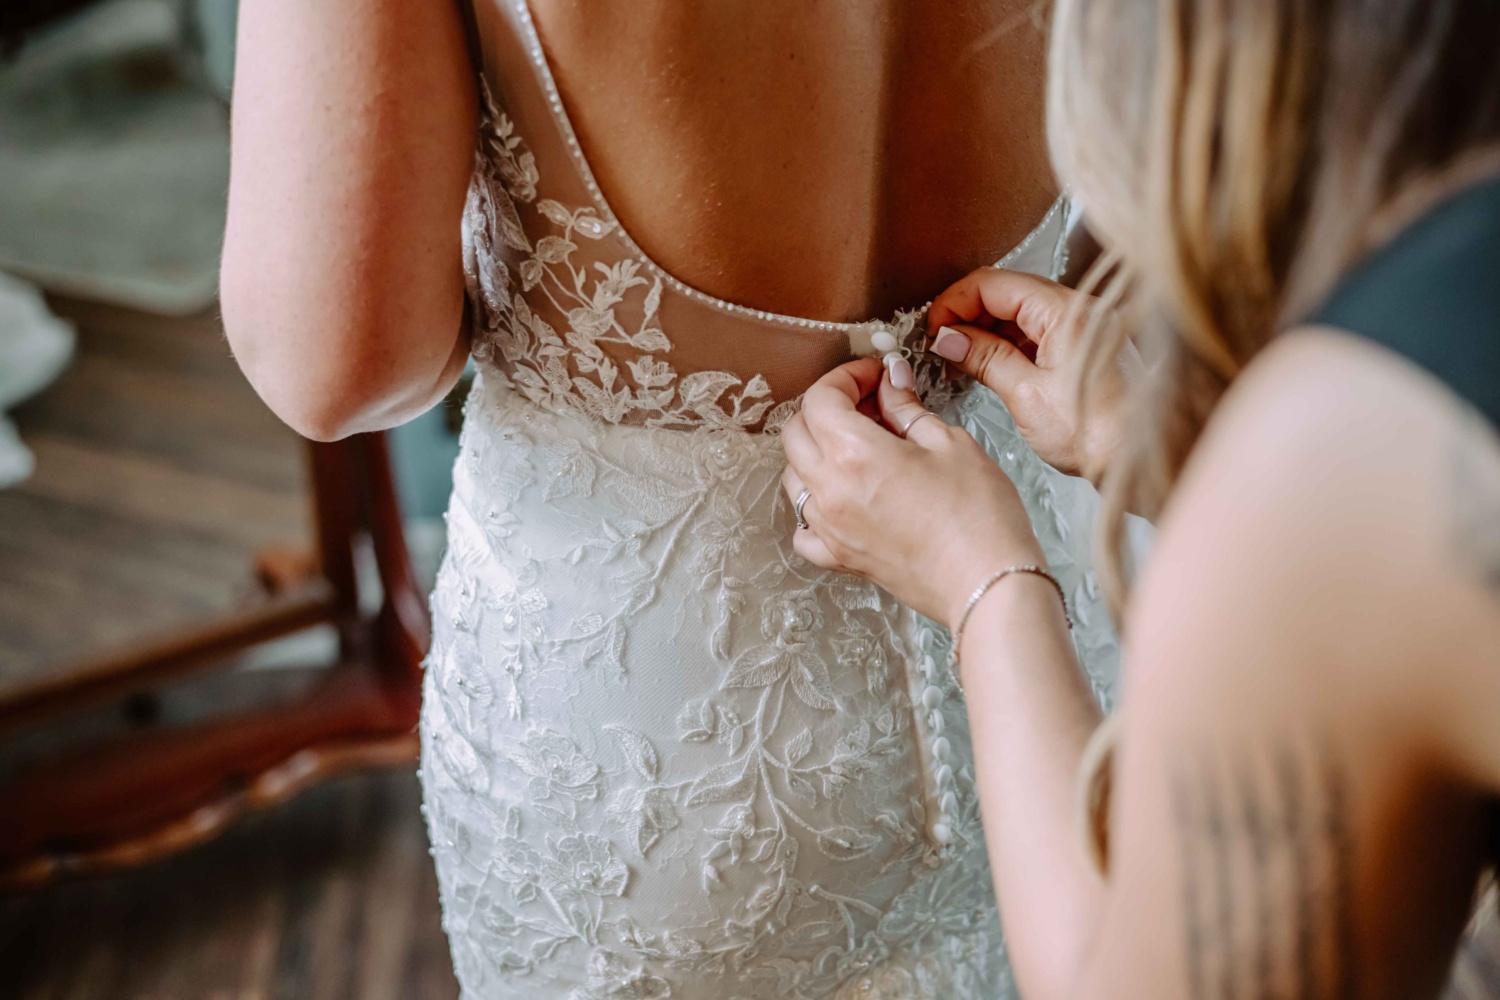 Maid of honor assisting bride in buttoning up her wedding dress.